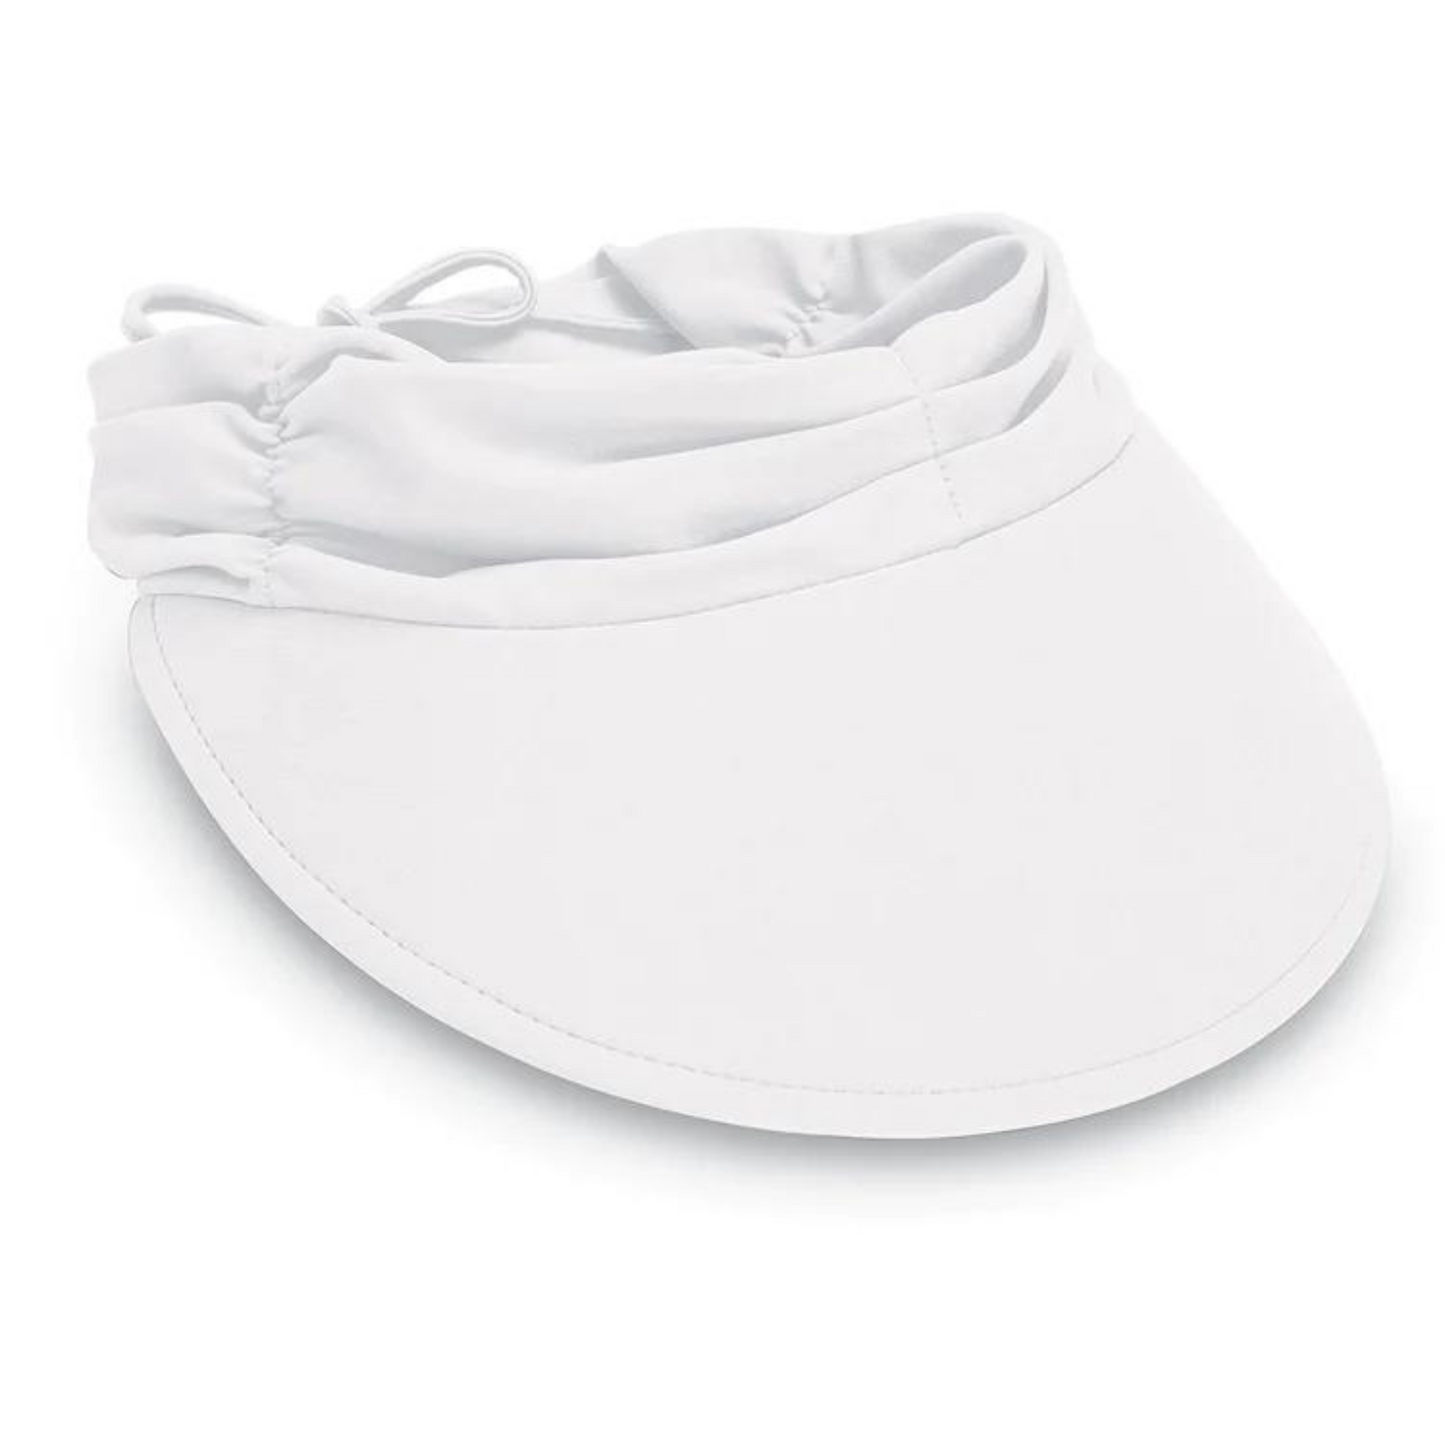 A photo of the White aqua visor. Showing the brim and the adjustable features.